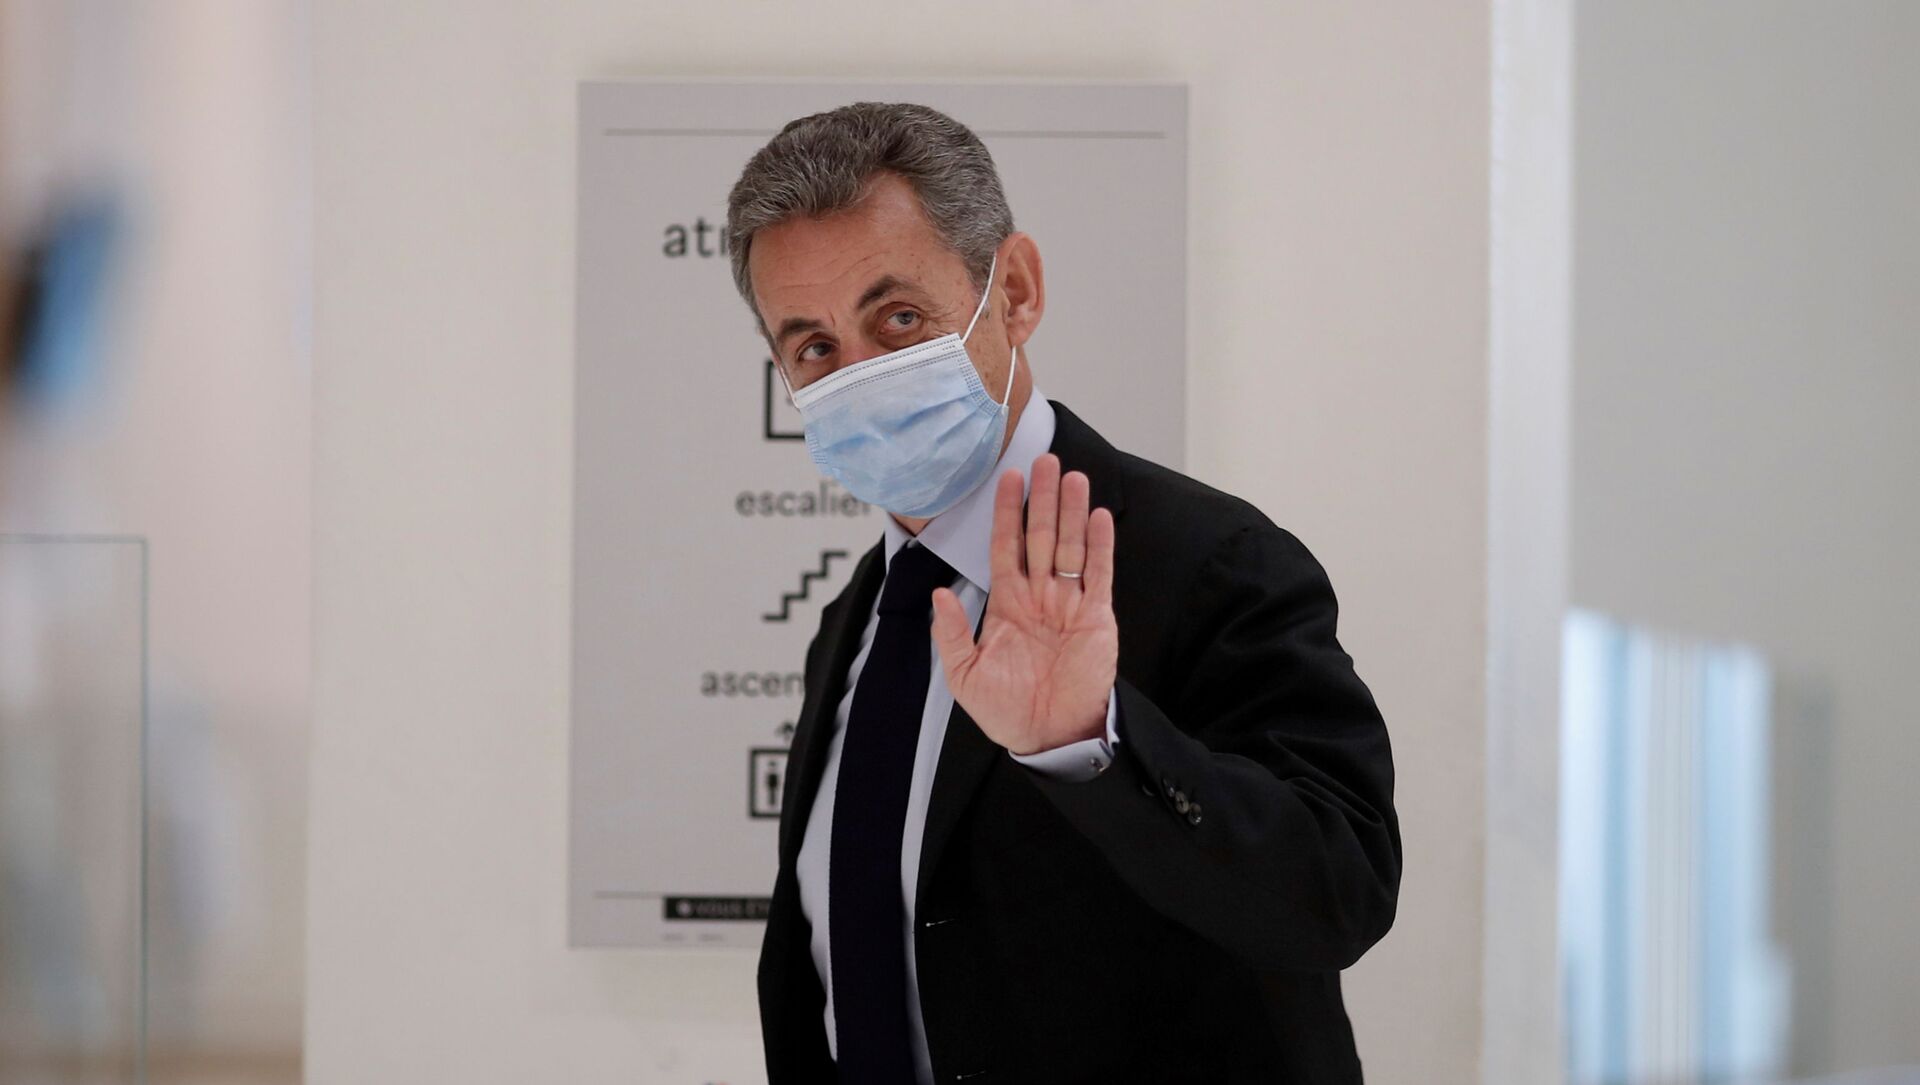 Former French President Nicolas Sarkozy waves during a break in his trial on charges of corruption and influence peddling, at Paris courthouse, France, November 30, 2020. - Sputnik International, 1920, 17.03.2021